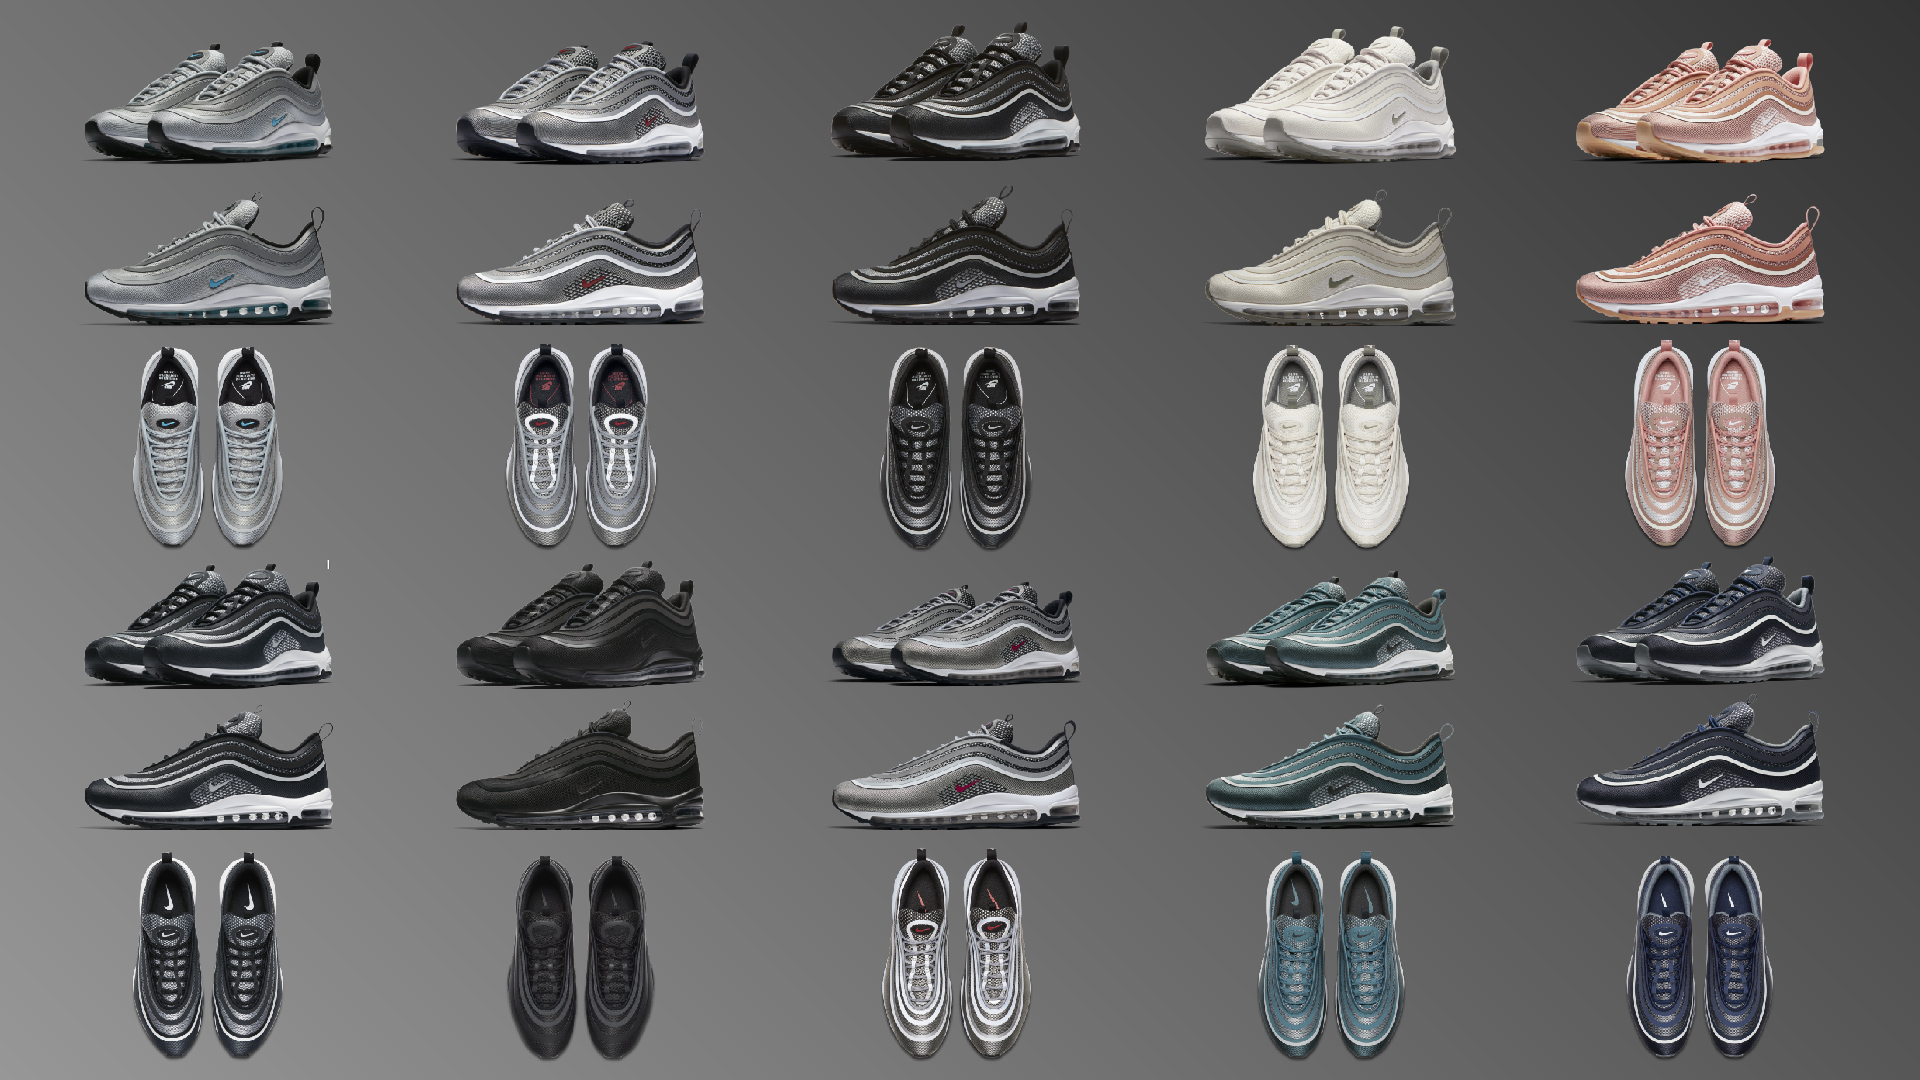 Nike Air Max 97 Fall 2017 Line-Up | WAVE®